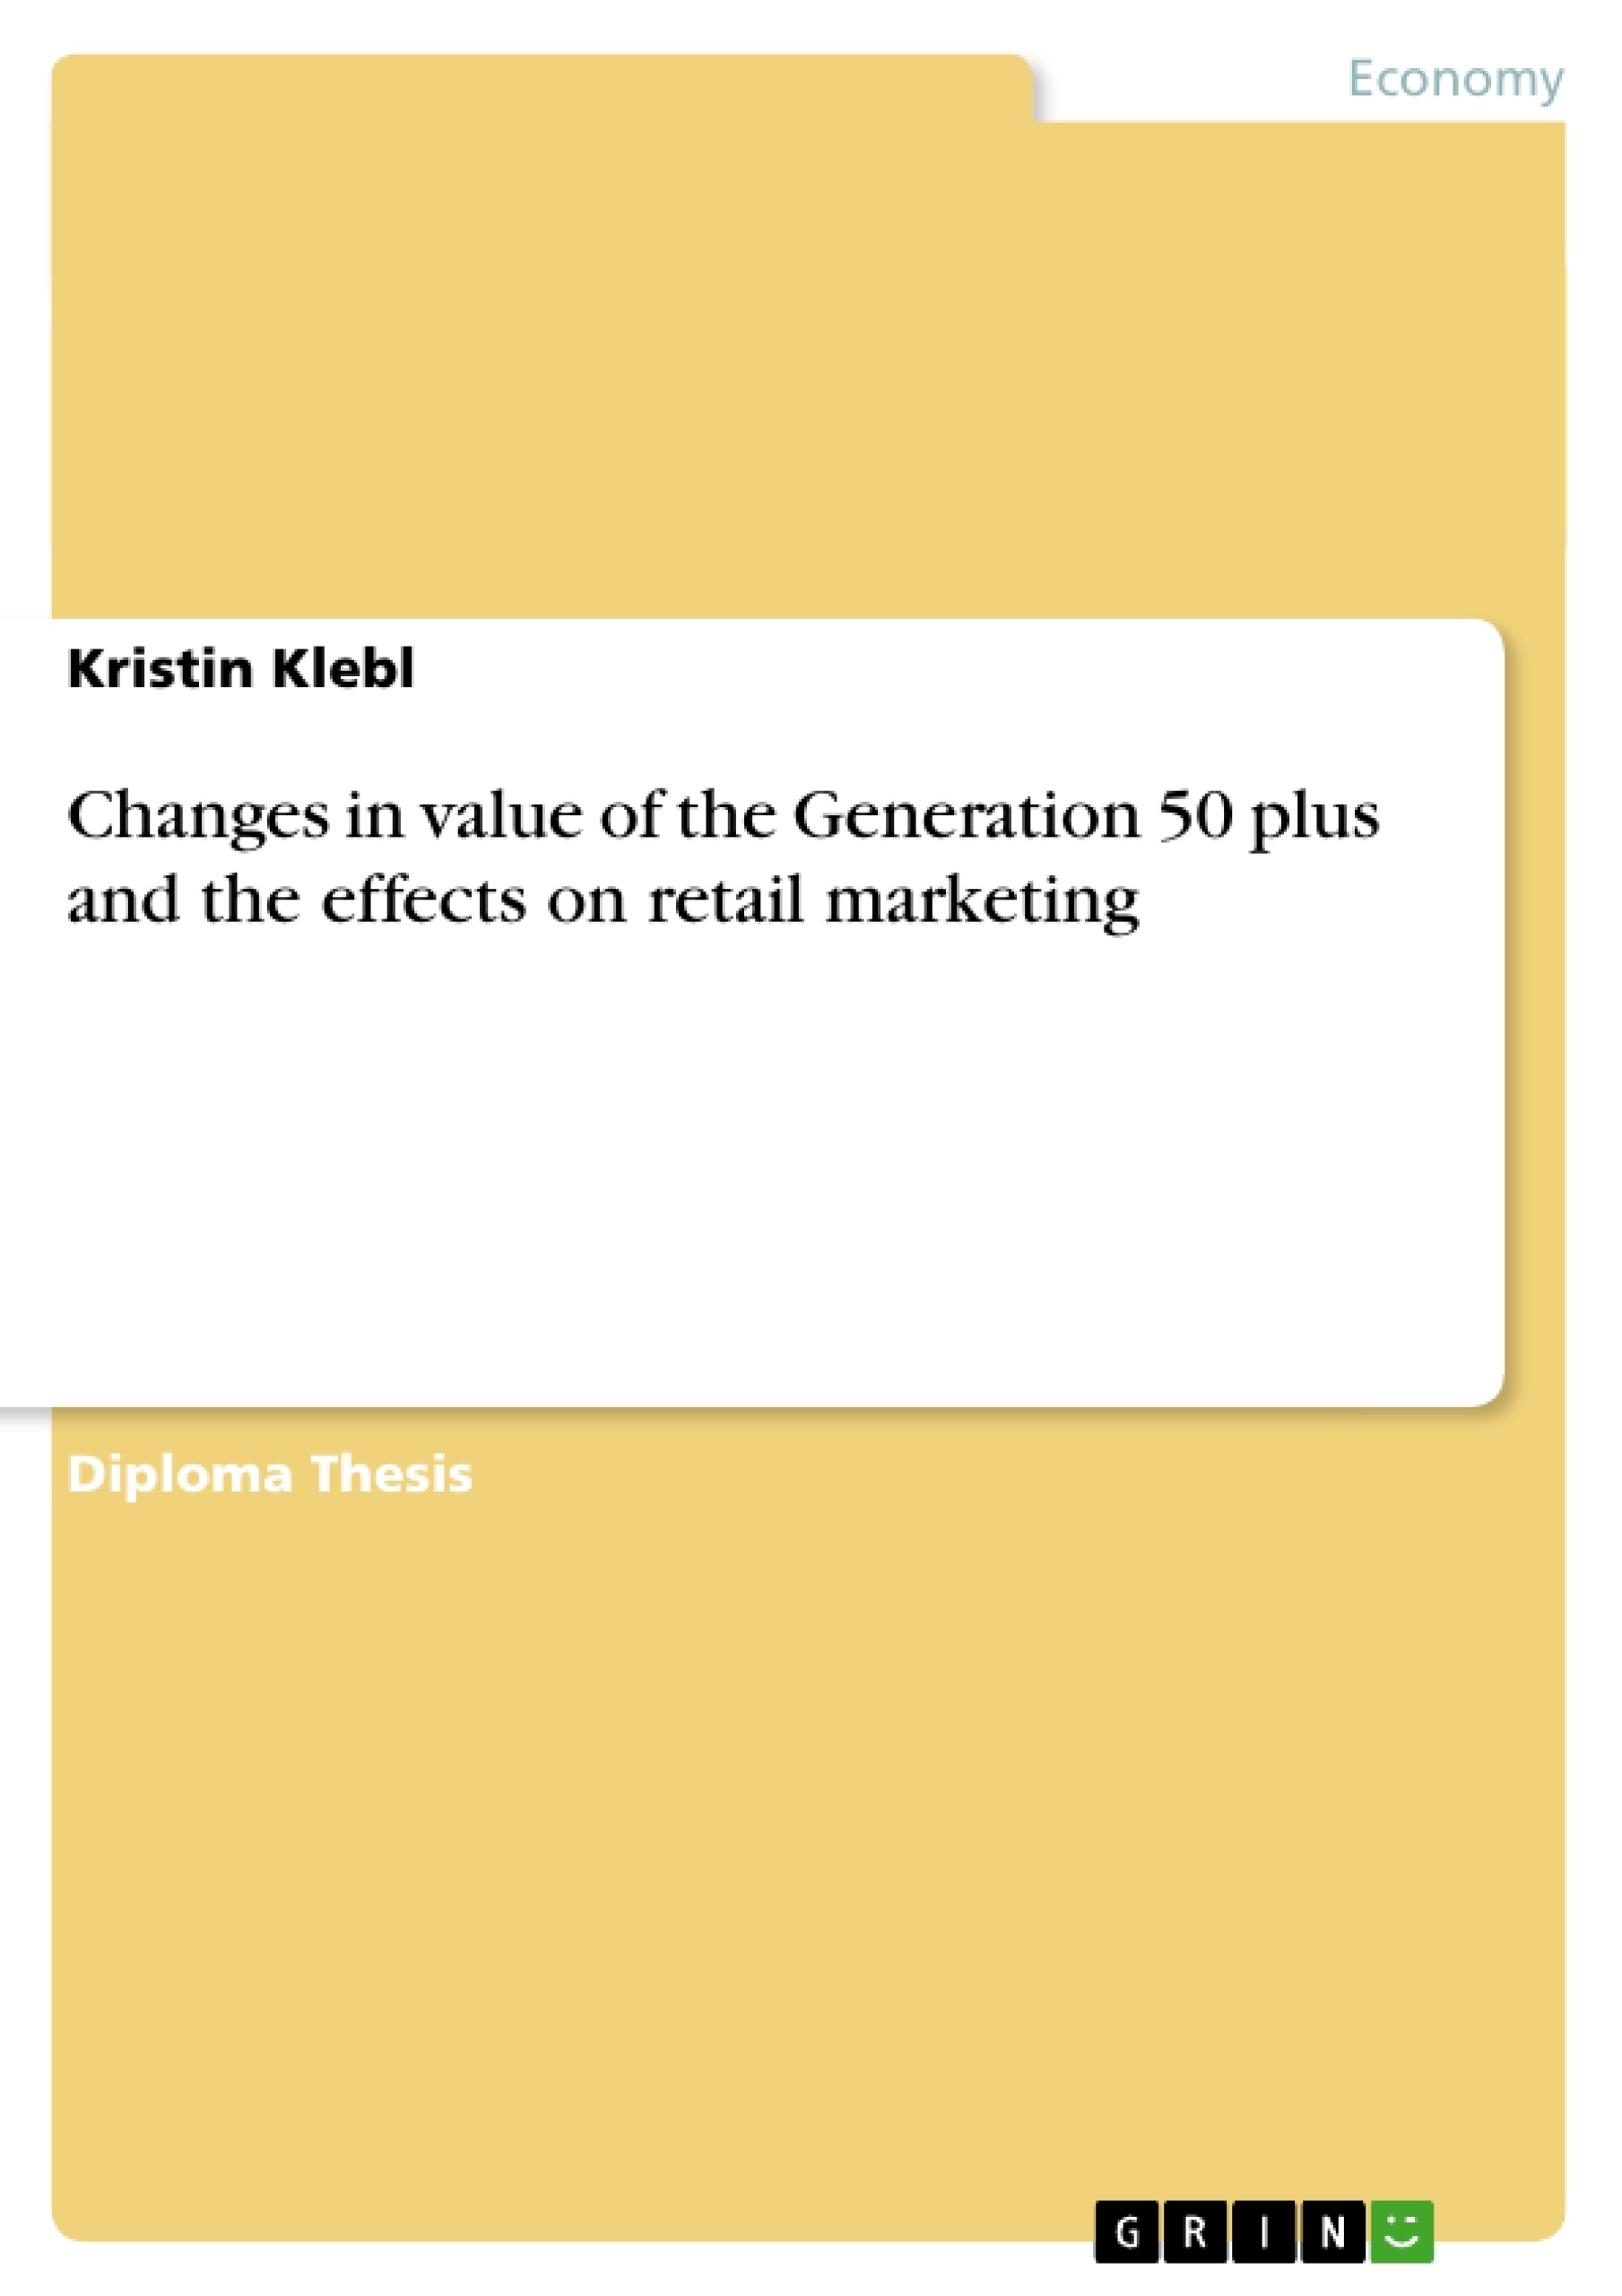 Title: Changes in value of the Generation 50 plus and the effects on retail marketing